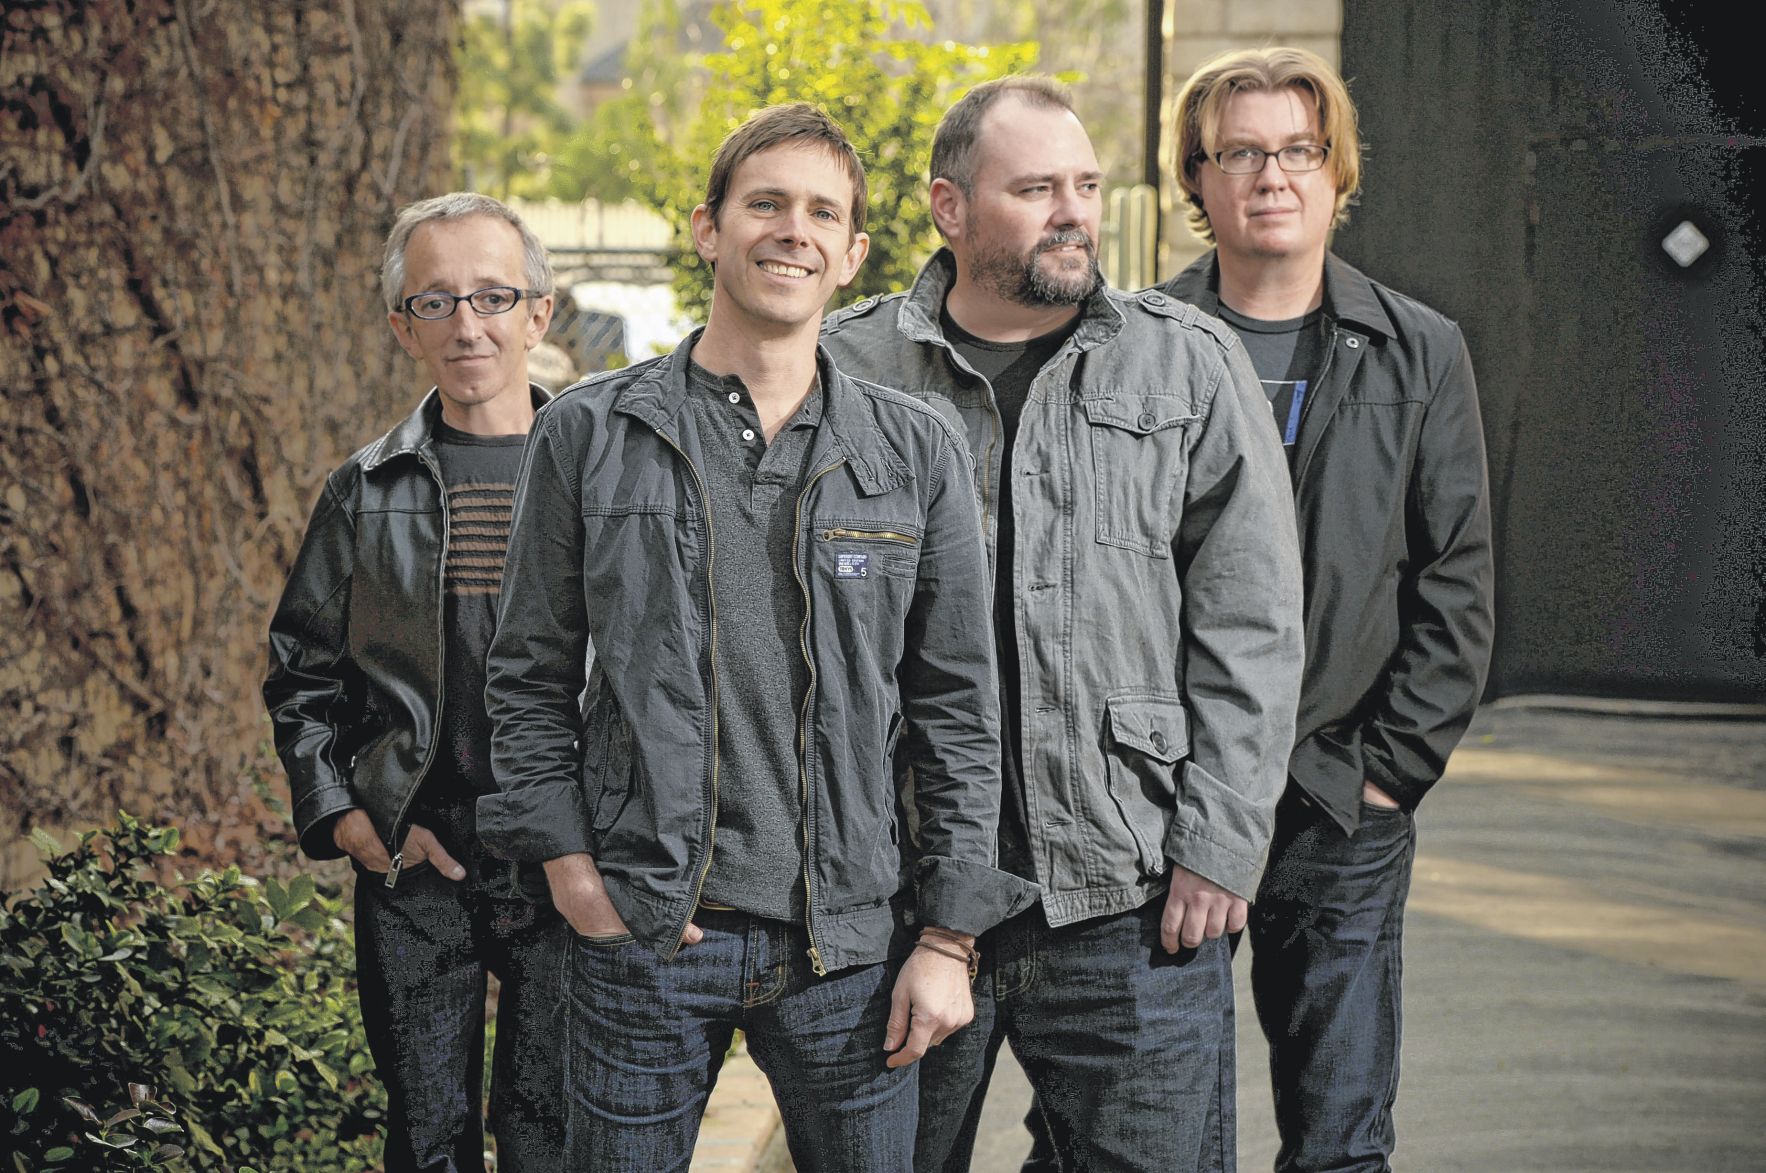 Relishing the past: Toad the Wet Sprocket fine with being